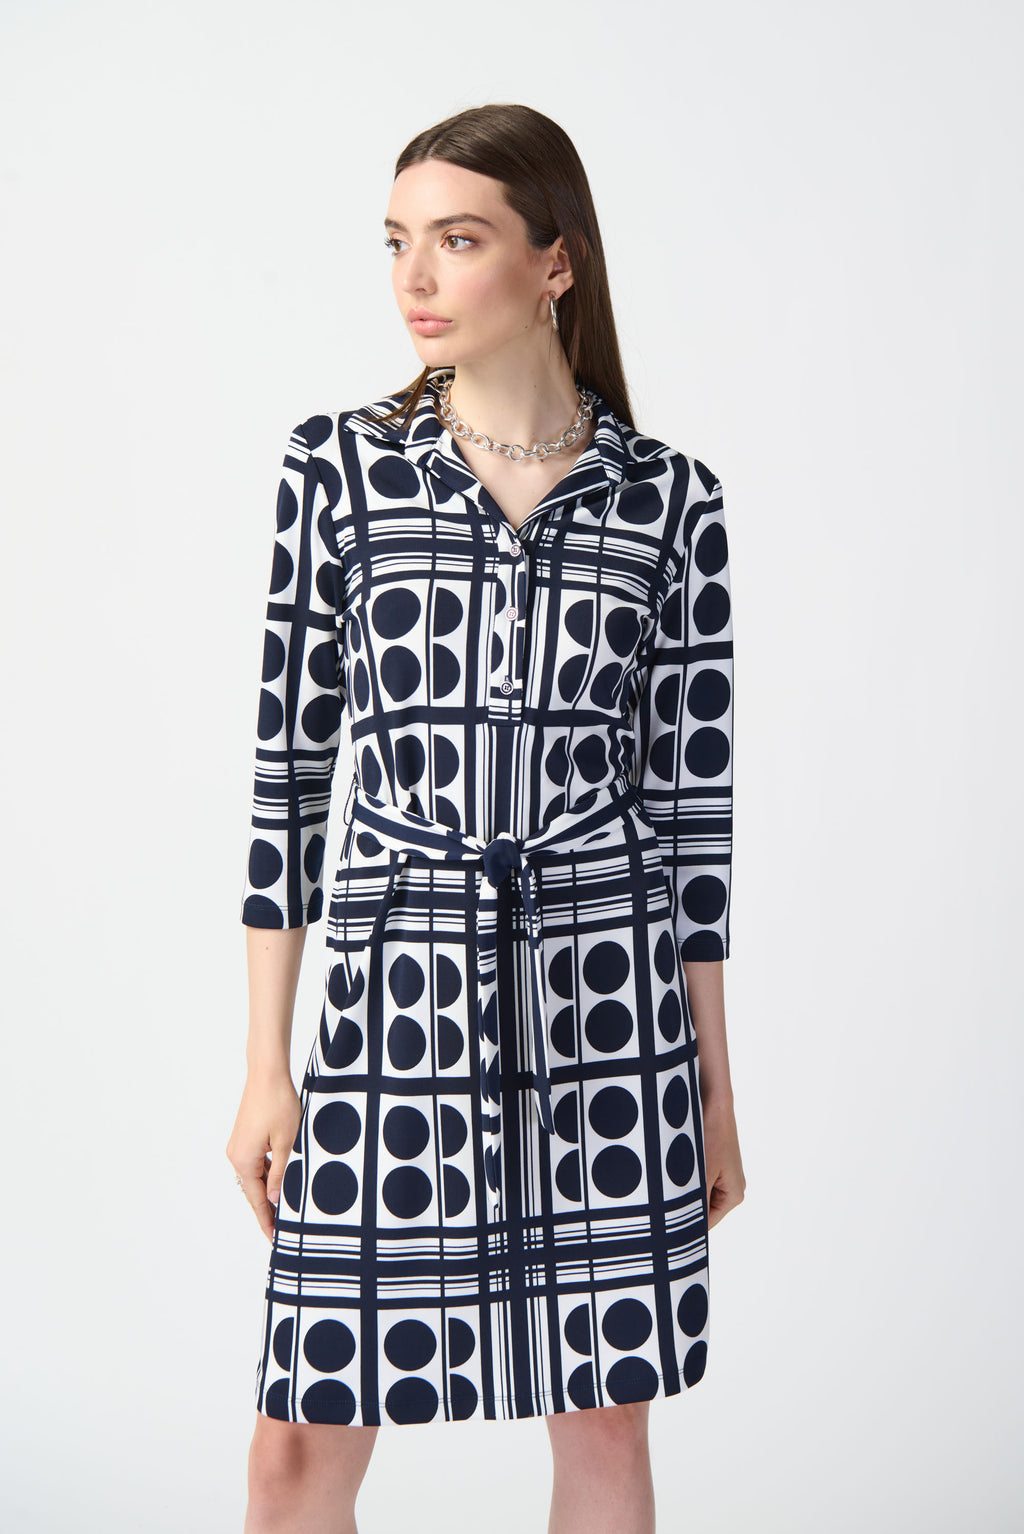 Indulge in effortless elegance with this luxurious dot-printed shirt dress. Made from premium, silky knit, it offers a comfortable, sophisticated look that transitions seamlessly from day to night. The elegant front placket and crisp collar lend a touch of refinement, while the three-quarter sleeves and cinching sash waist create a flattering silhouette.